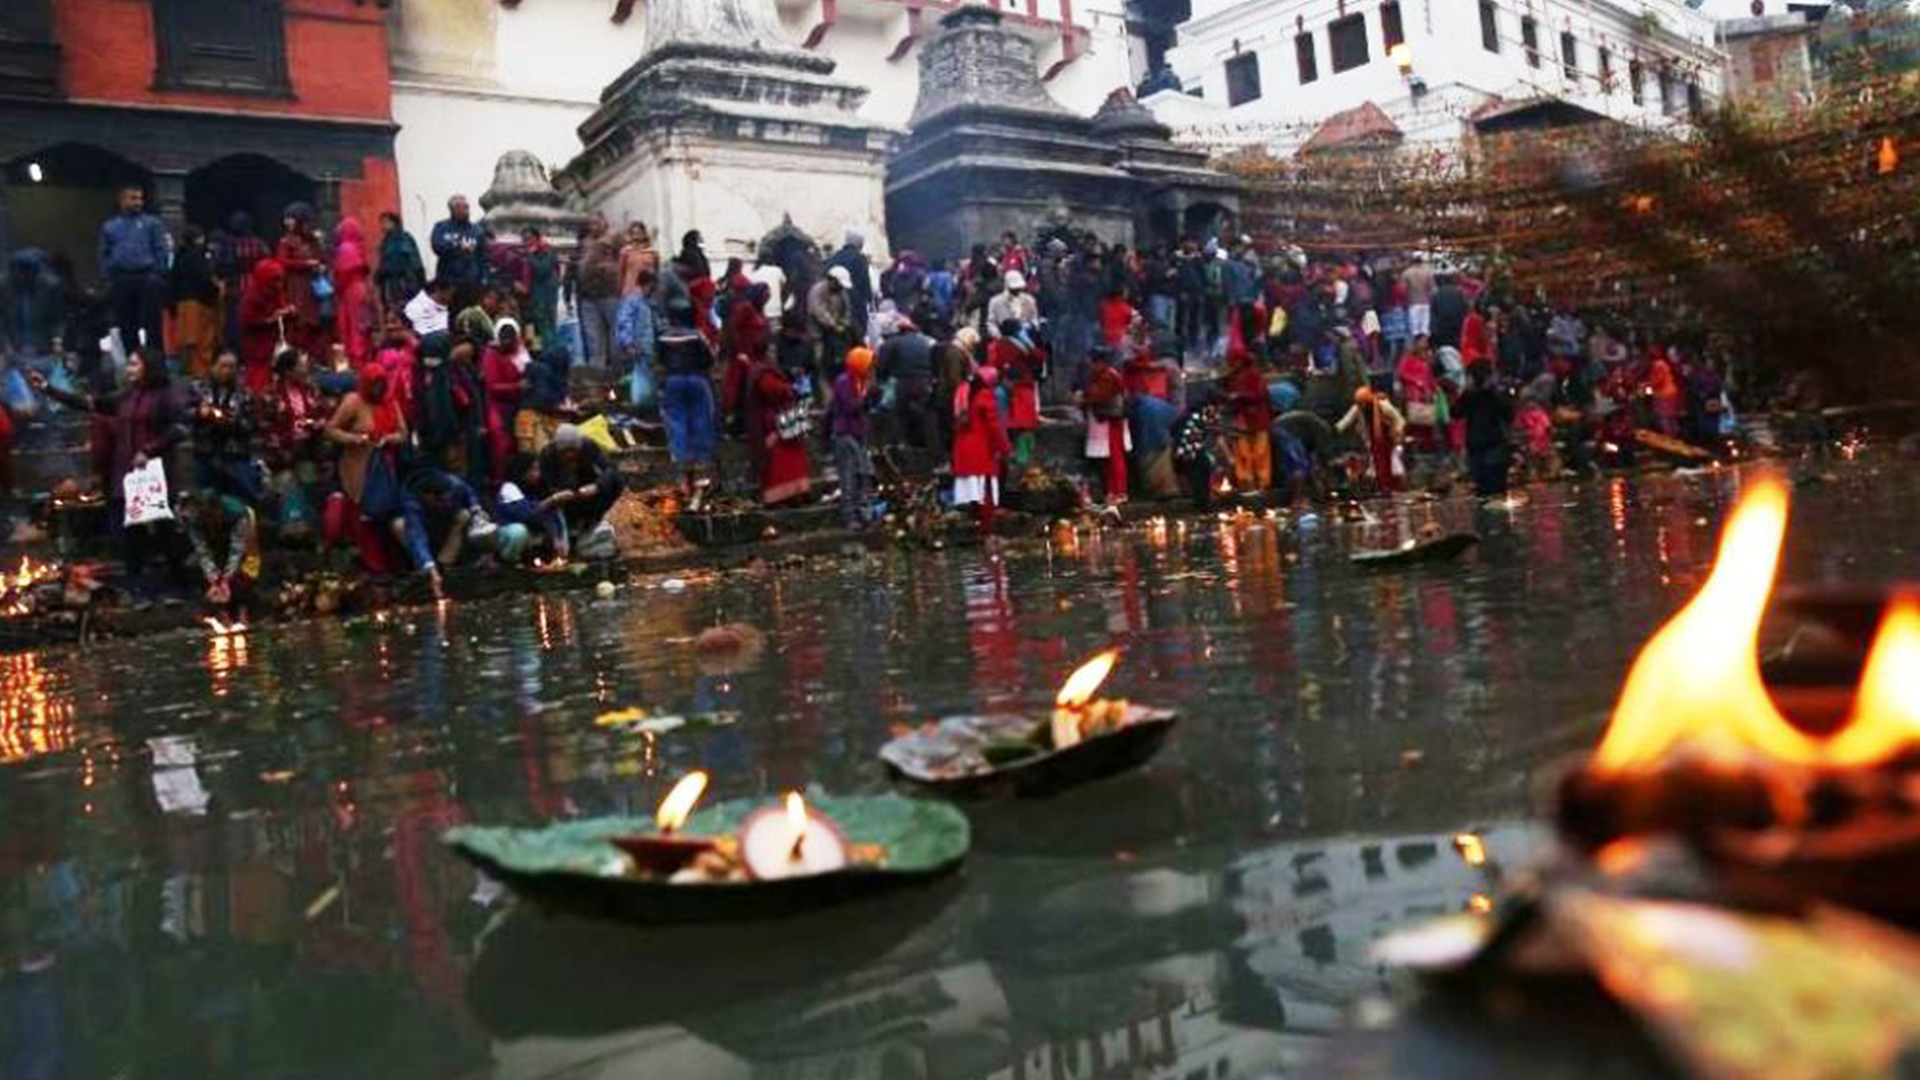 Balachaturdashi being observed today